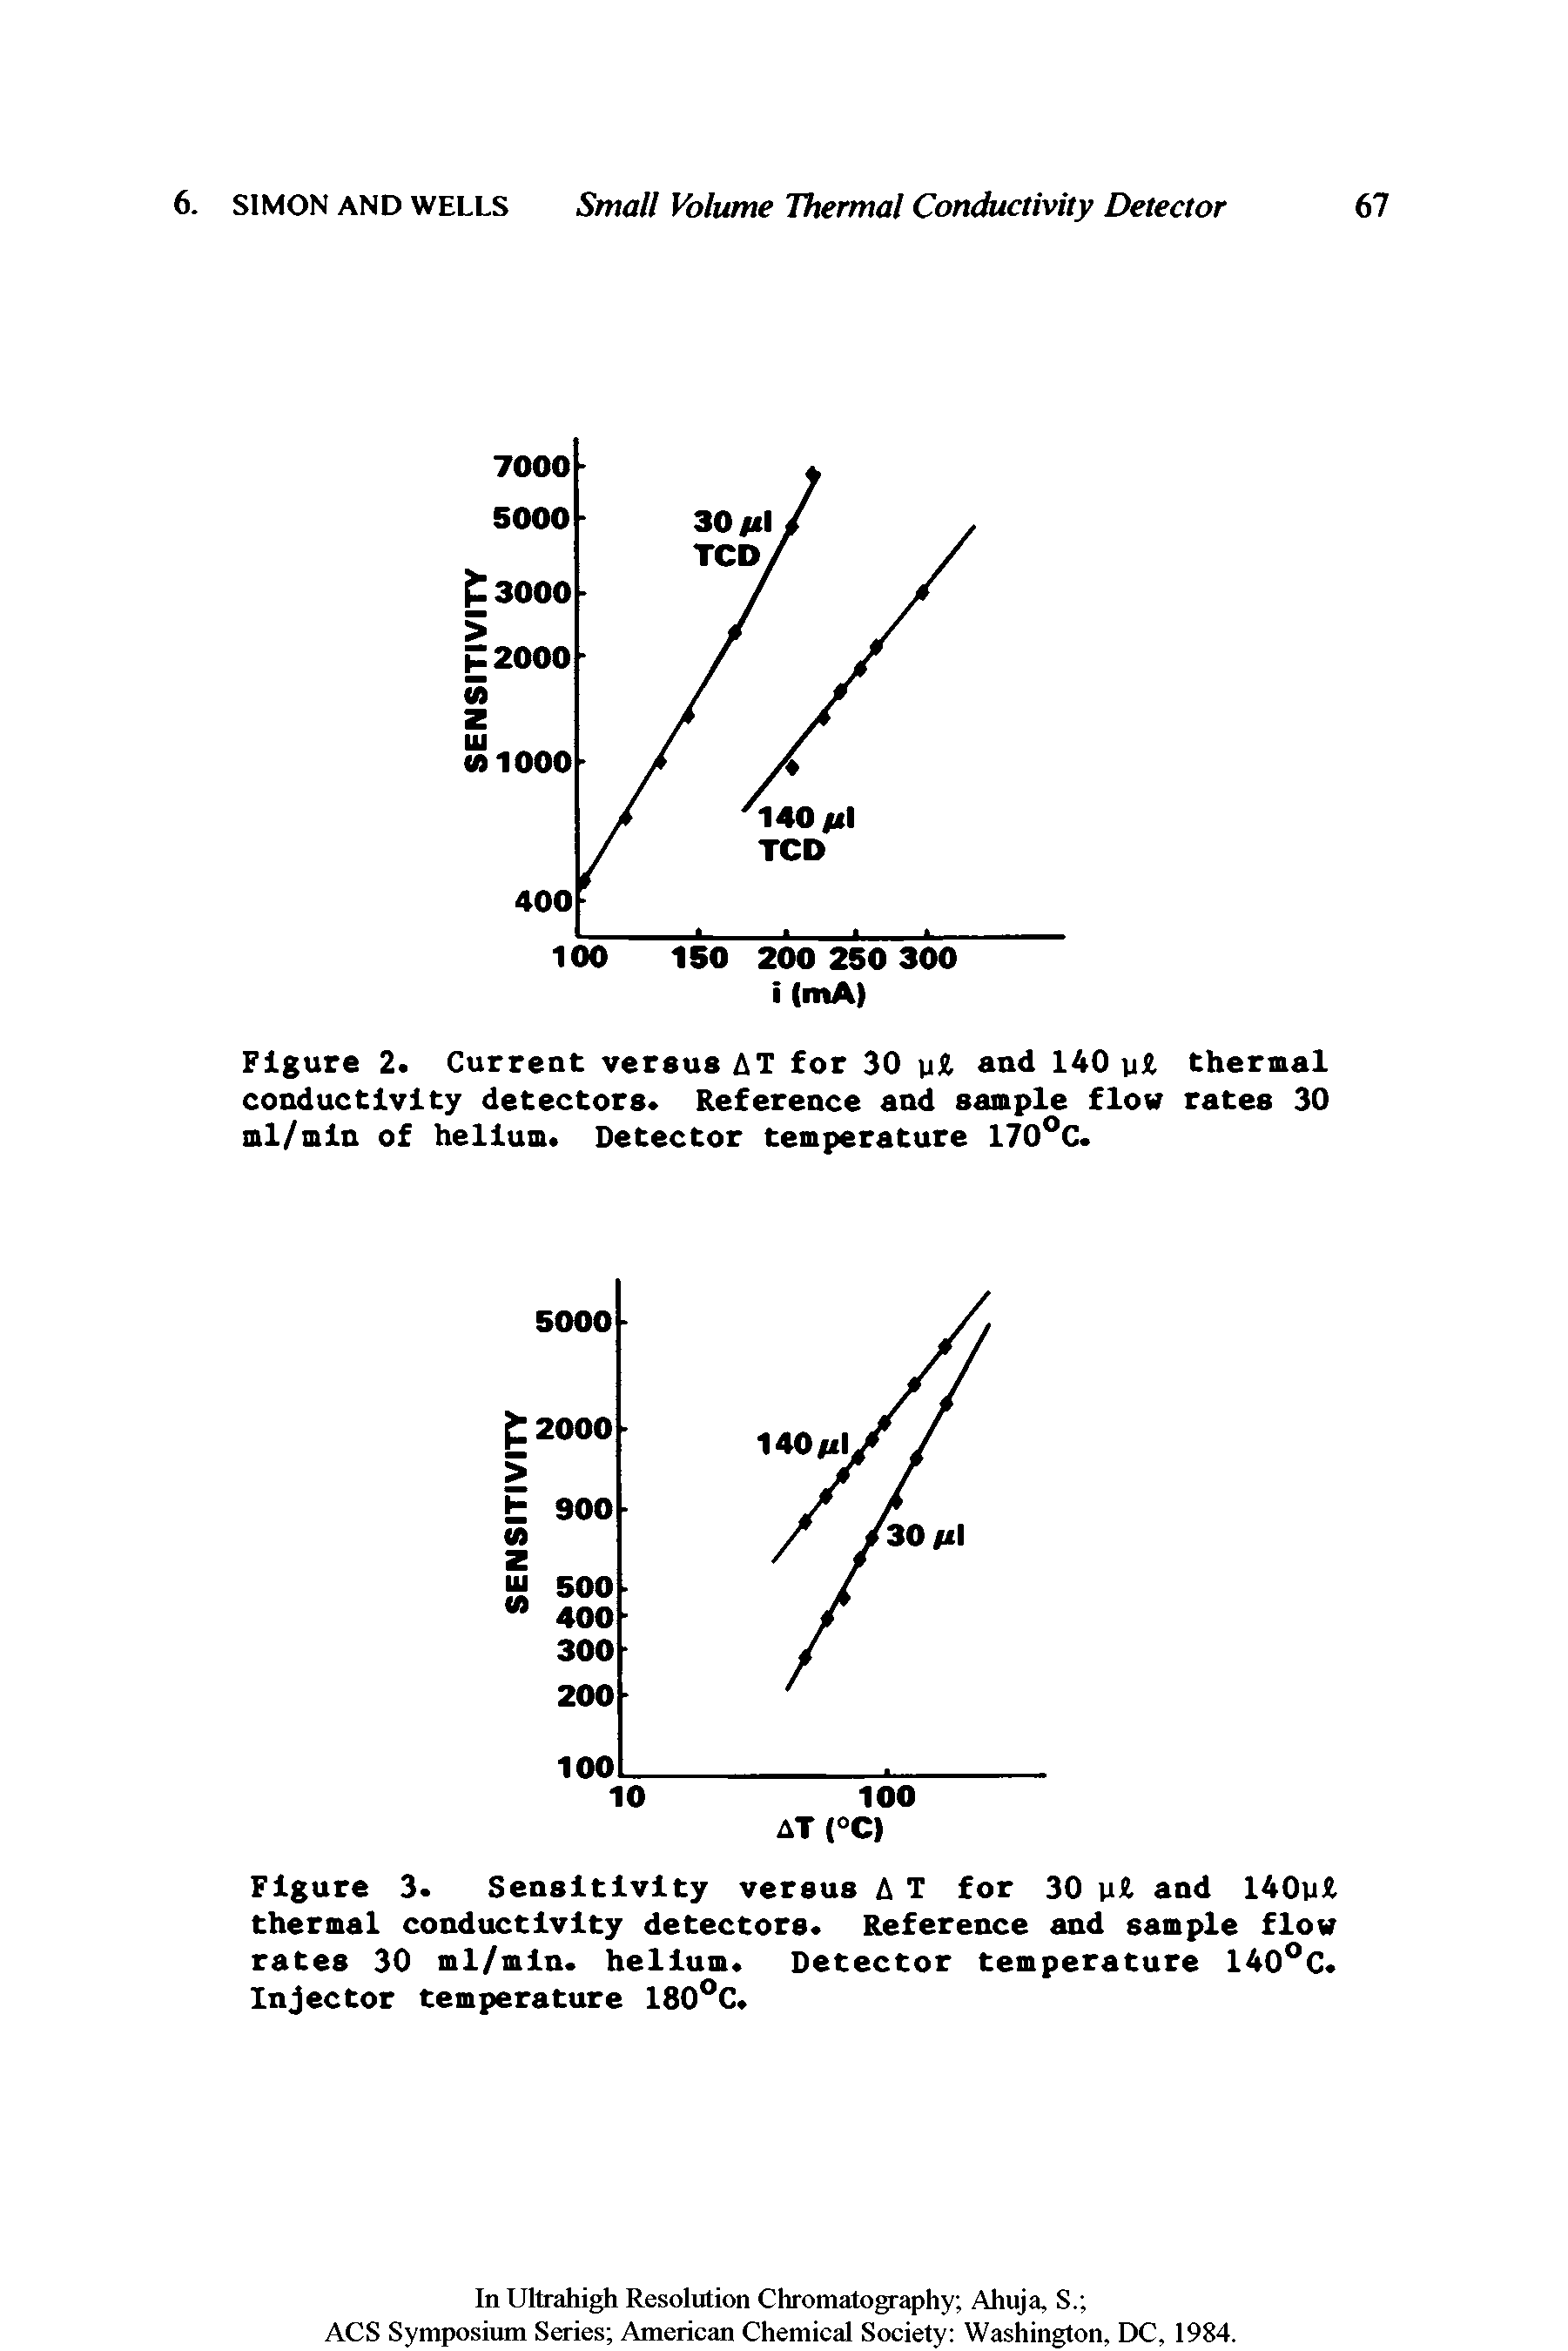 Figure 3. Sensitivity versus A T for 30 and 140)il thermal conductivity detectors. Reference and sample flow rates 30 ml/mln. helium. Detector temperature 140°C.